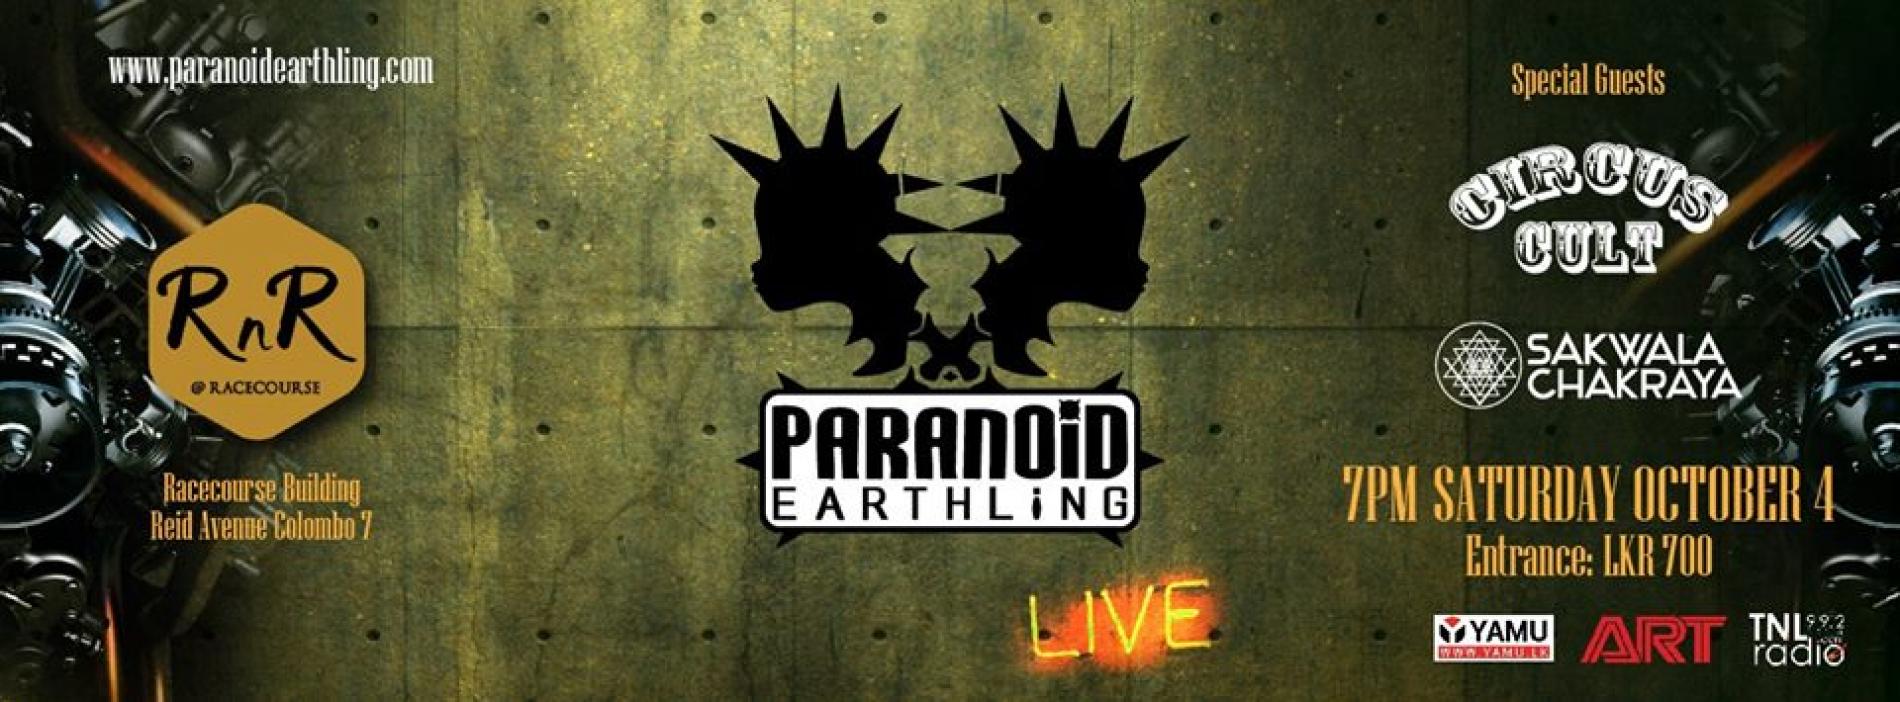 Paranoid Earthling LIVE